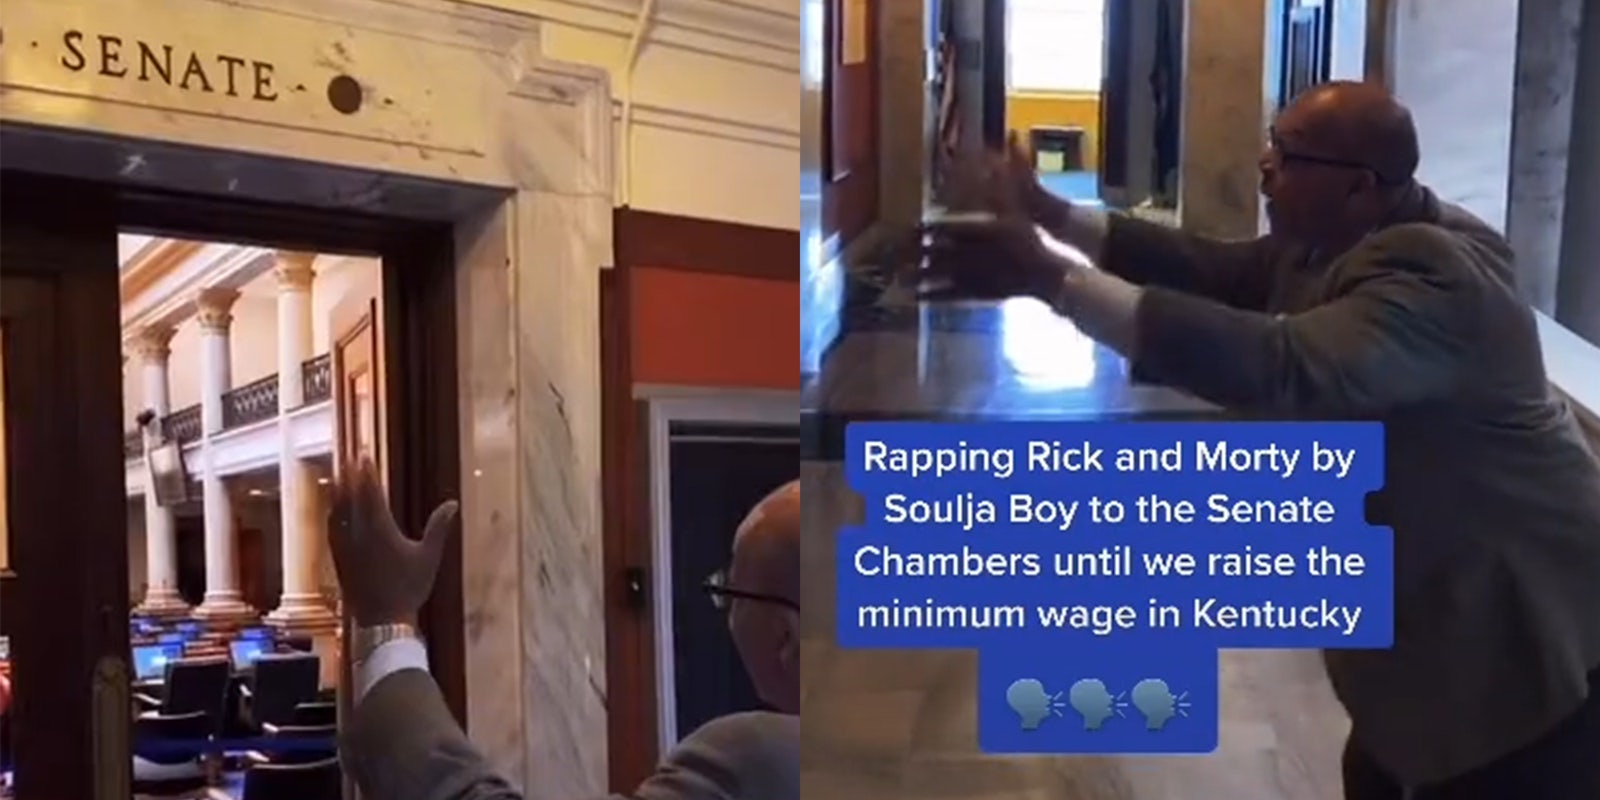 man waving arms near doorway labeled 'Senate' (l) man waving arms with caption 'Rapping Rick and Morty by Soulja Boy to the Senate Chambers until we raise the minimum wage in Kentucky' (r)